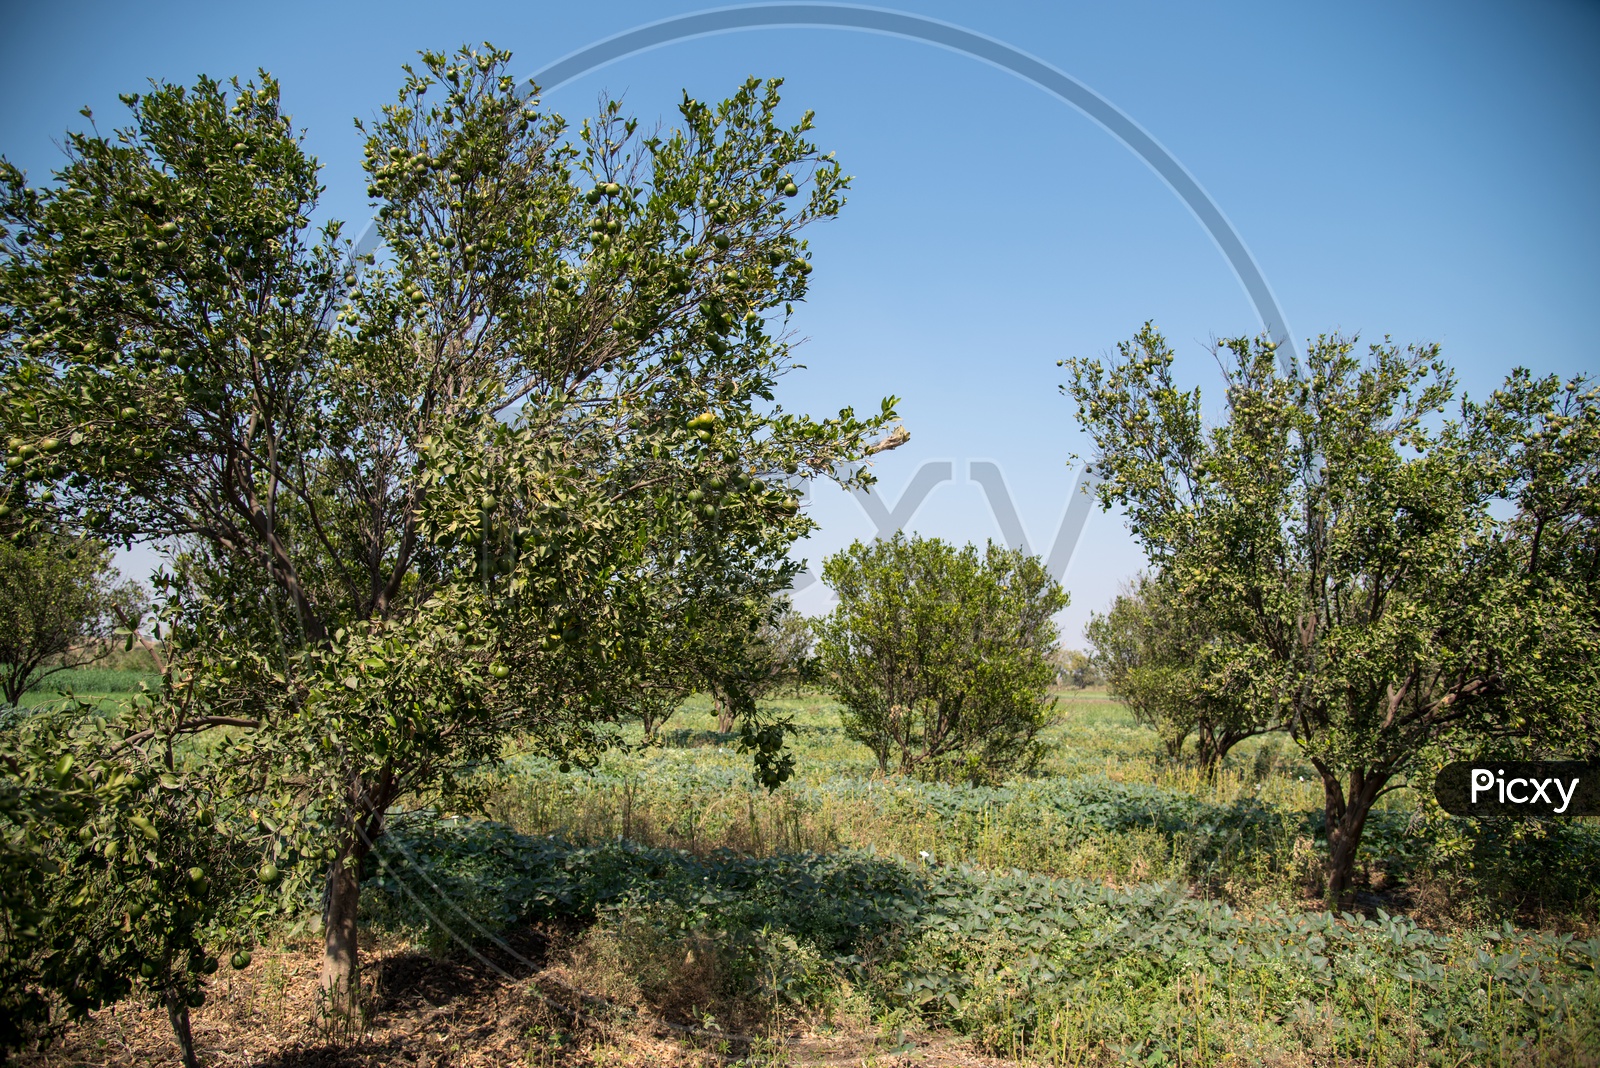 Fresh Sweet Oranges Growing  on Trees At an Organic Farm Or Agricultural Farm